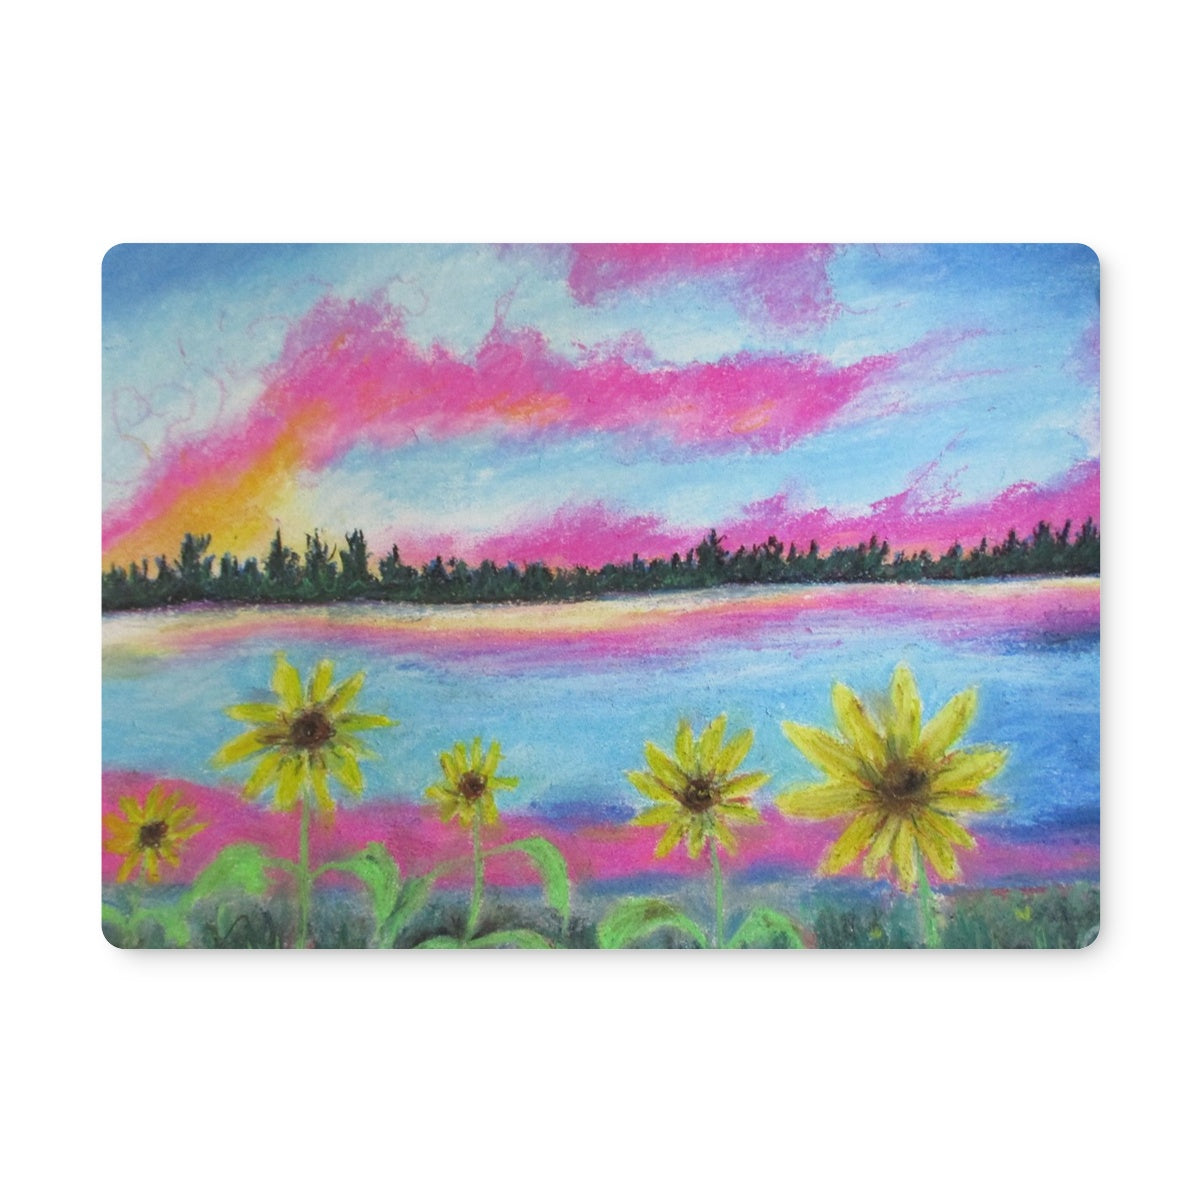 Poet and her Soul Speaking Paintings ~ prints, originals and more  Pushing purple and pink on the lake Flower attention it is to make Flower flower that is all Sunsets, animals, fantasy and fall  Original Artwork and Poetry of Artist Jen Shearer  This is a original painting printed on merchandise.